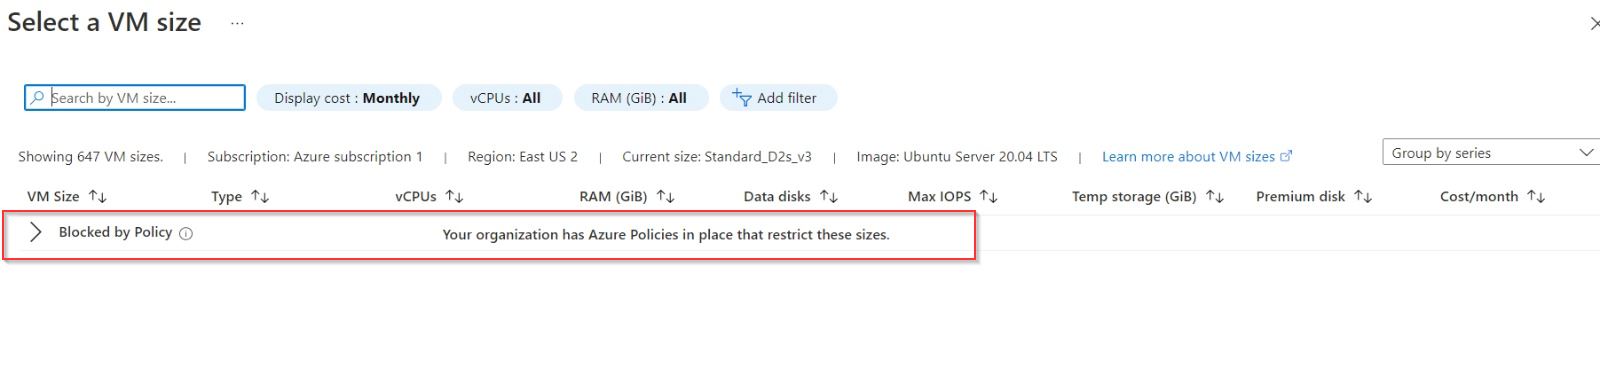  blocked by policy image in select a VM size